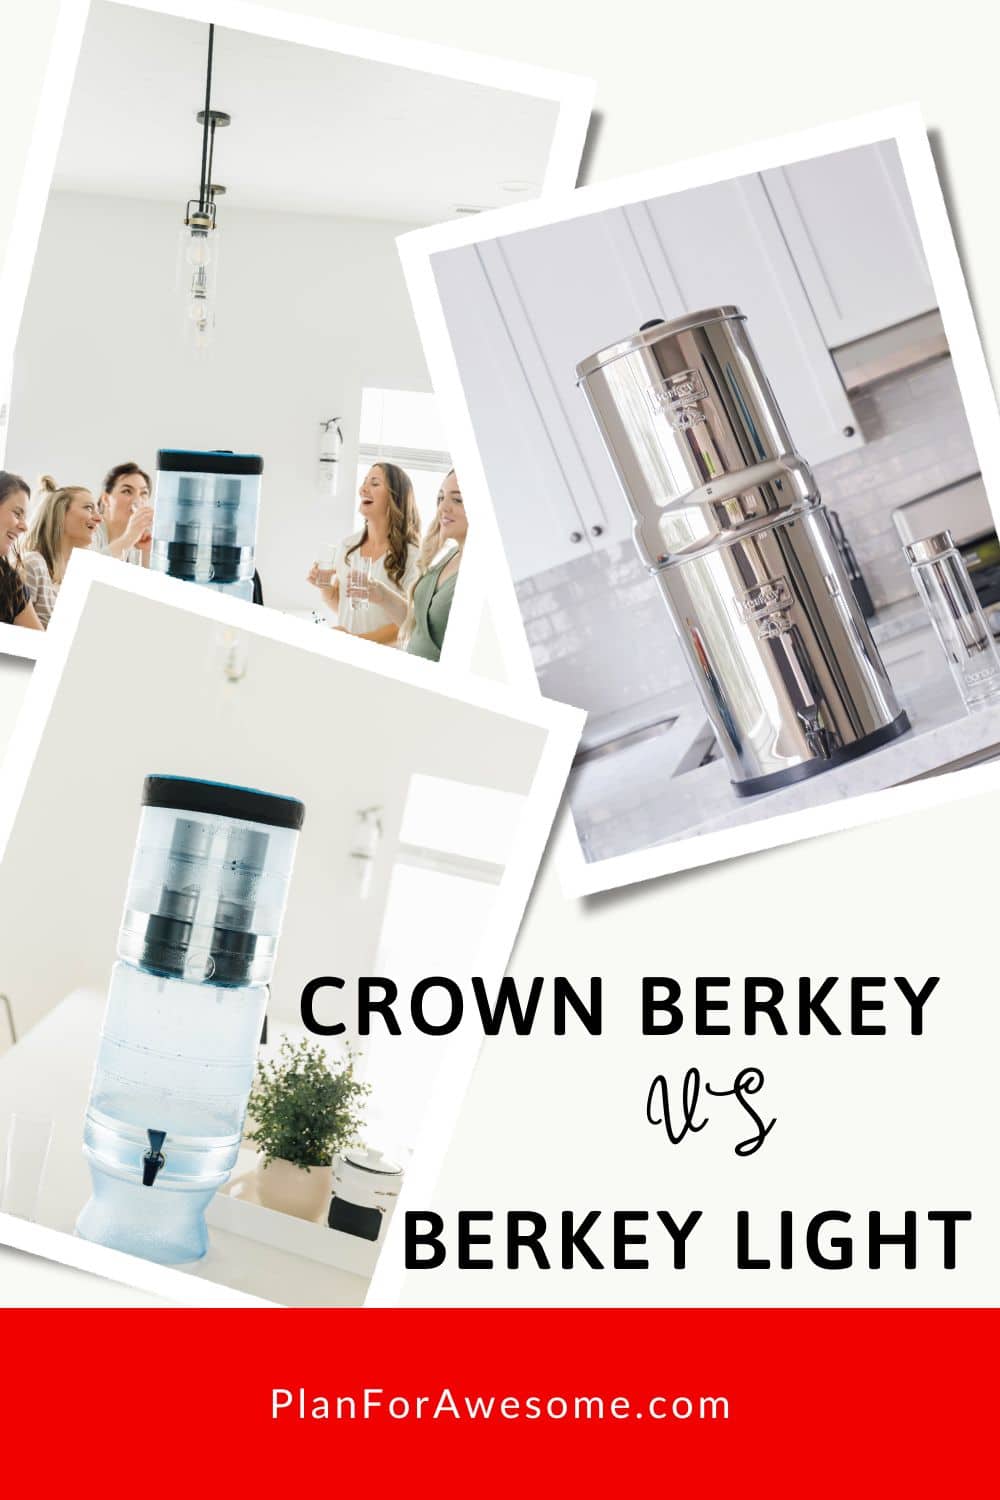 How to Decide the best size of berkey water filter